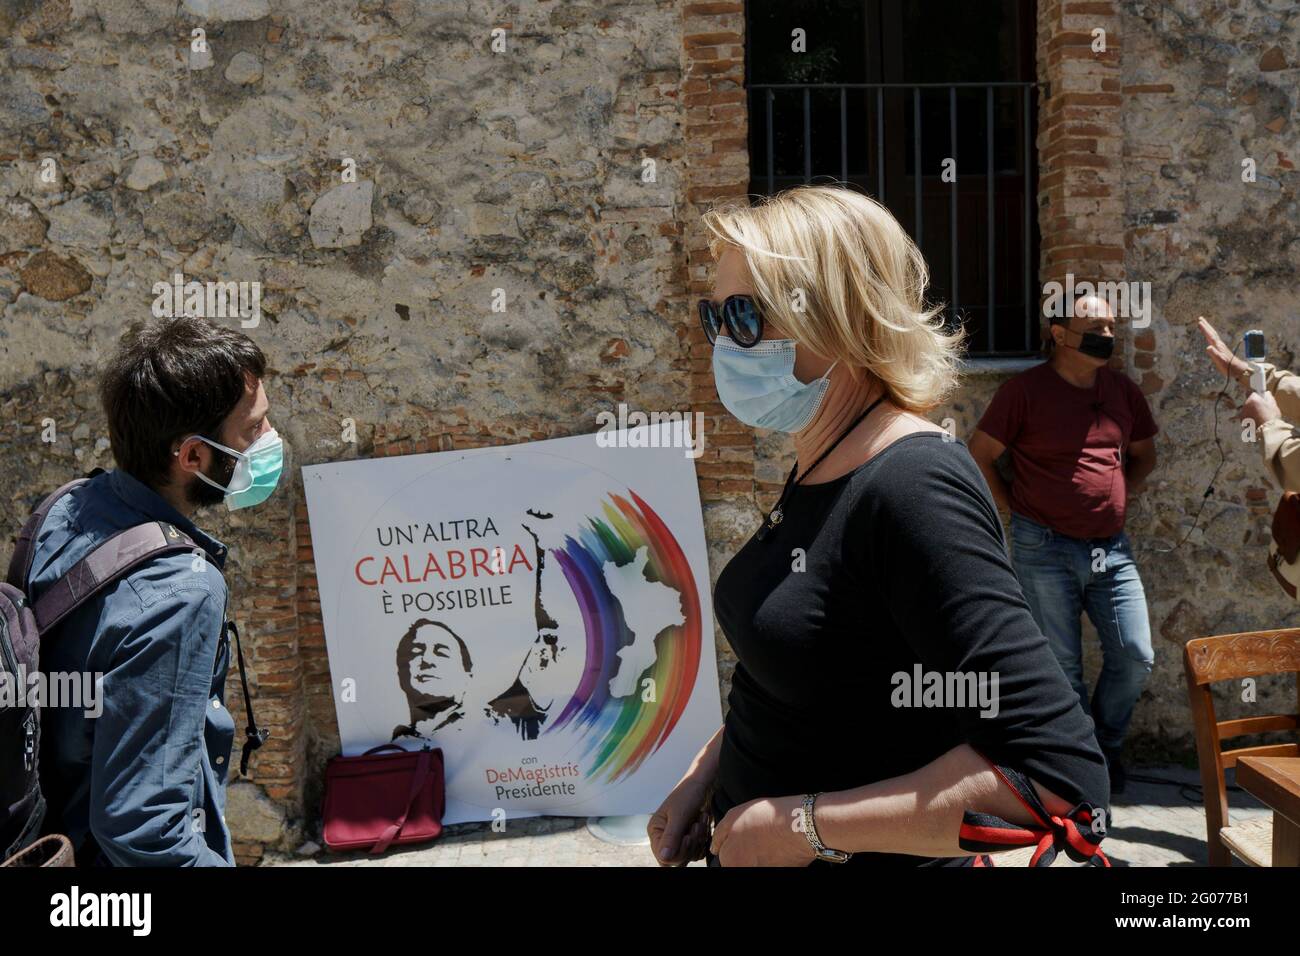 A woman passing by the banner with the new list's logo, during the press conference.Domenico Lucano “Mimmo”, former pro-migrant mayor of Riace, presented the electoral list “Un'Altra Calabria è possibile” (Another Calabria is possible) for the 2021 Calabrian regional election during a press conference hosted by Journalist Pietro Melia close to the local restaurant 'Taverna Donna Rosa'. The list will support the candidature of the mayor of Napoli, Luigi de Magistris, as Calabria Region's Governor. (Photo by Valeria Ferraro/SOPA Images/Sipa USA) Stock Photo